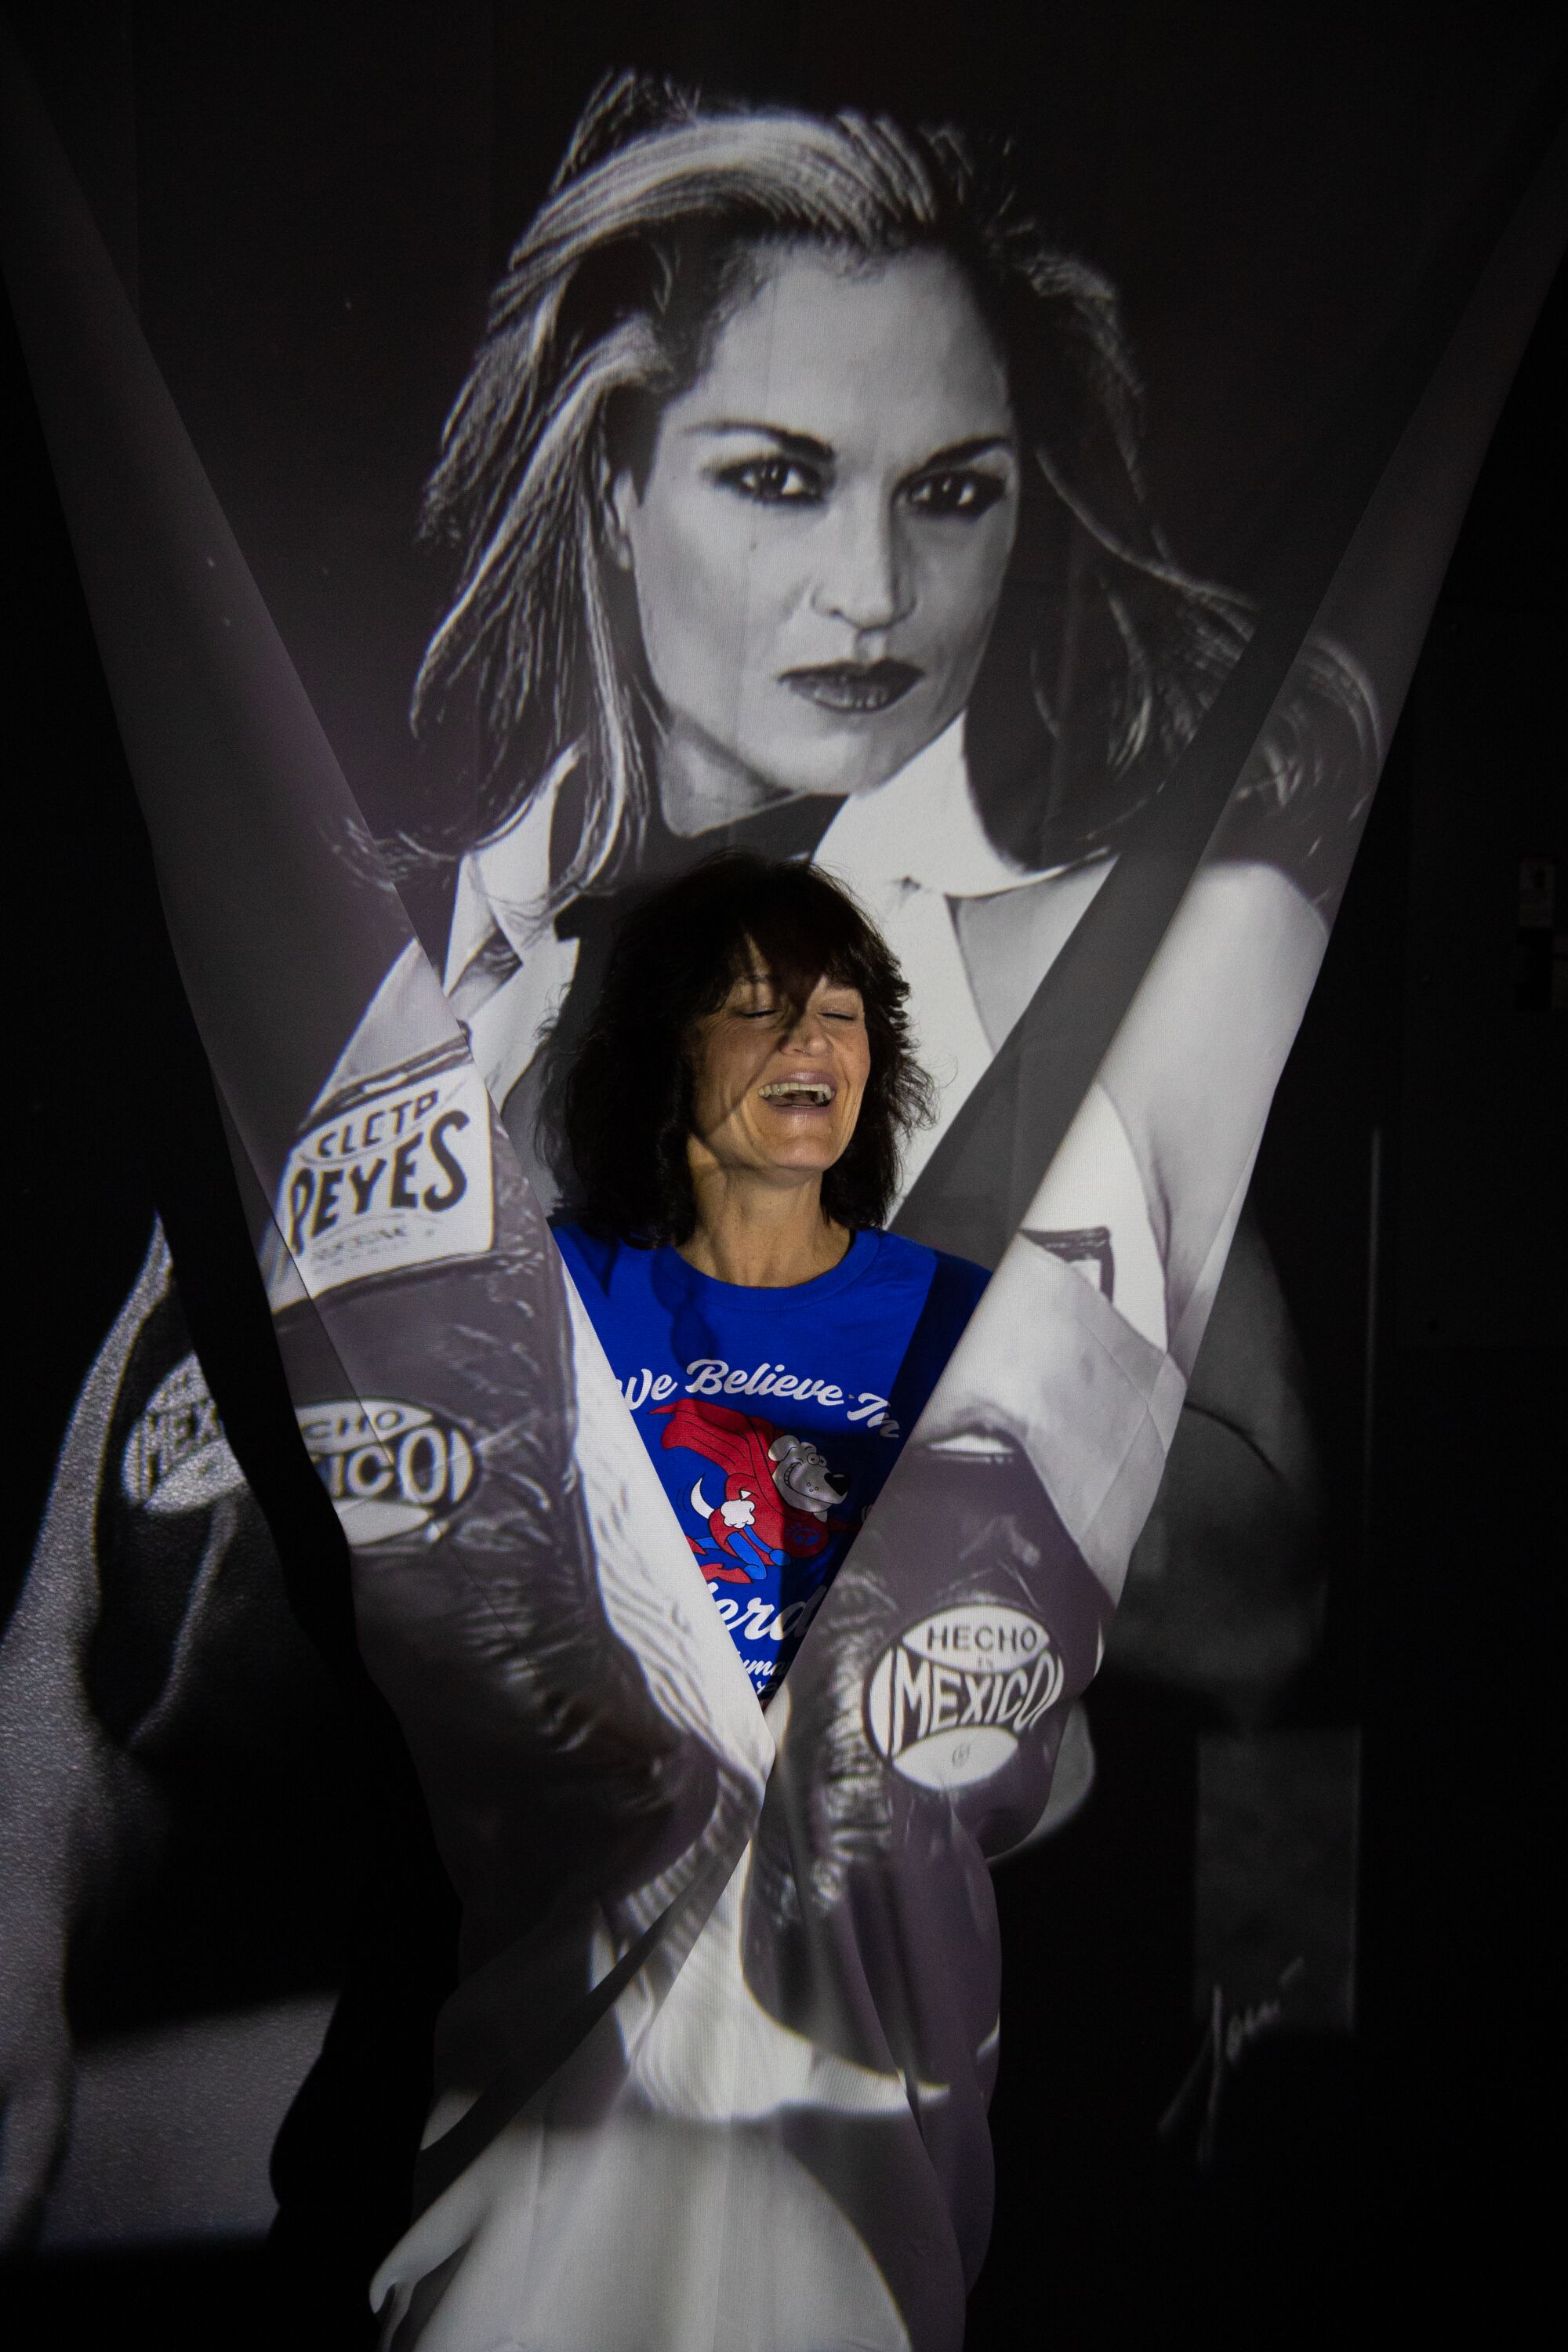 A woman stands in front of a larger image of a woman with boxing gloves in black and white.